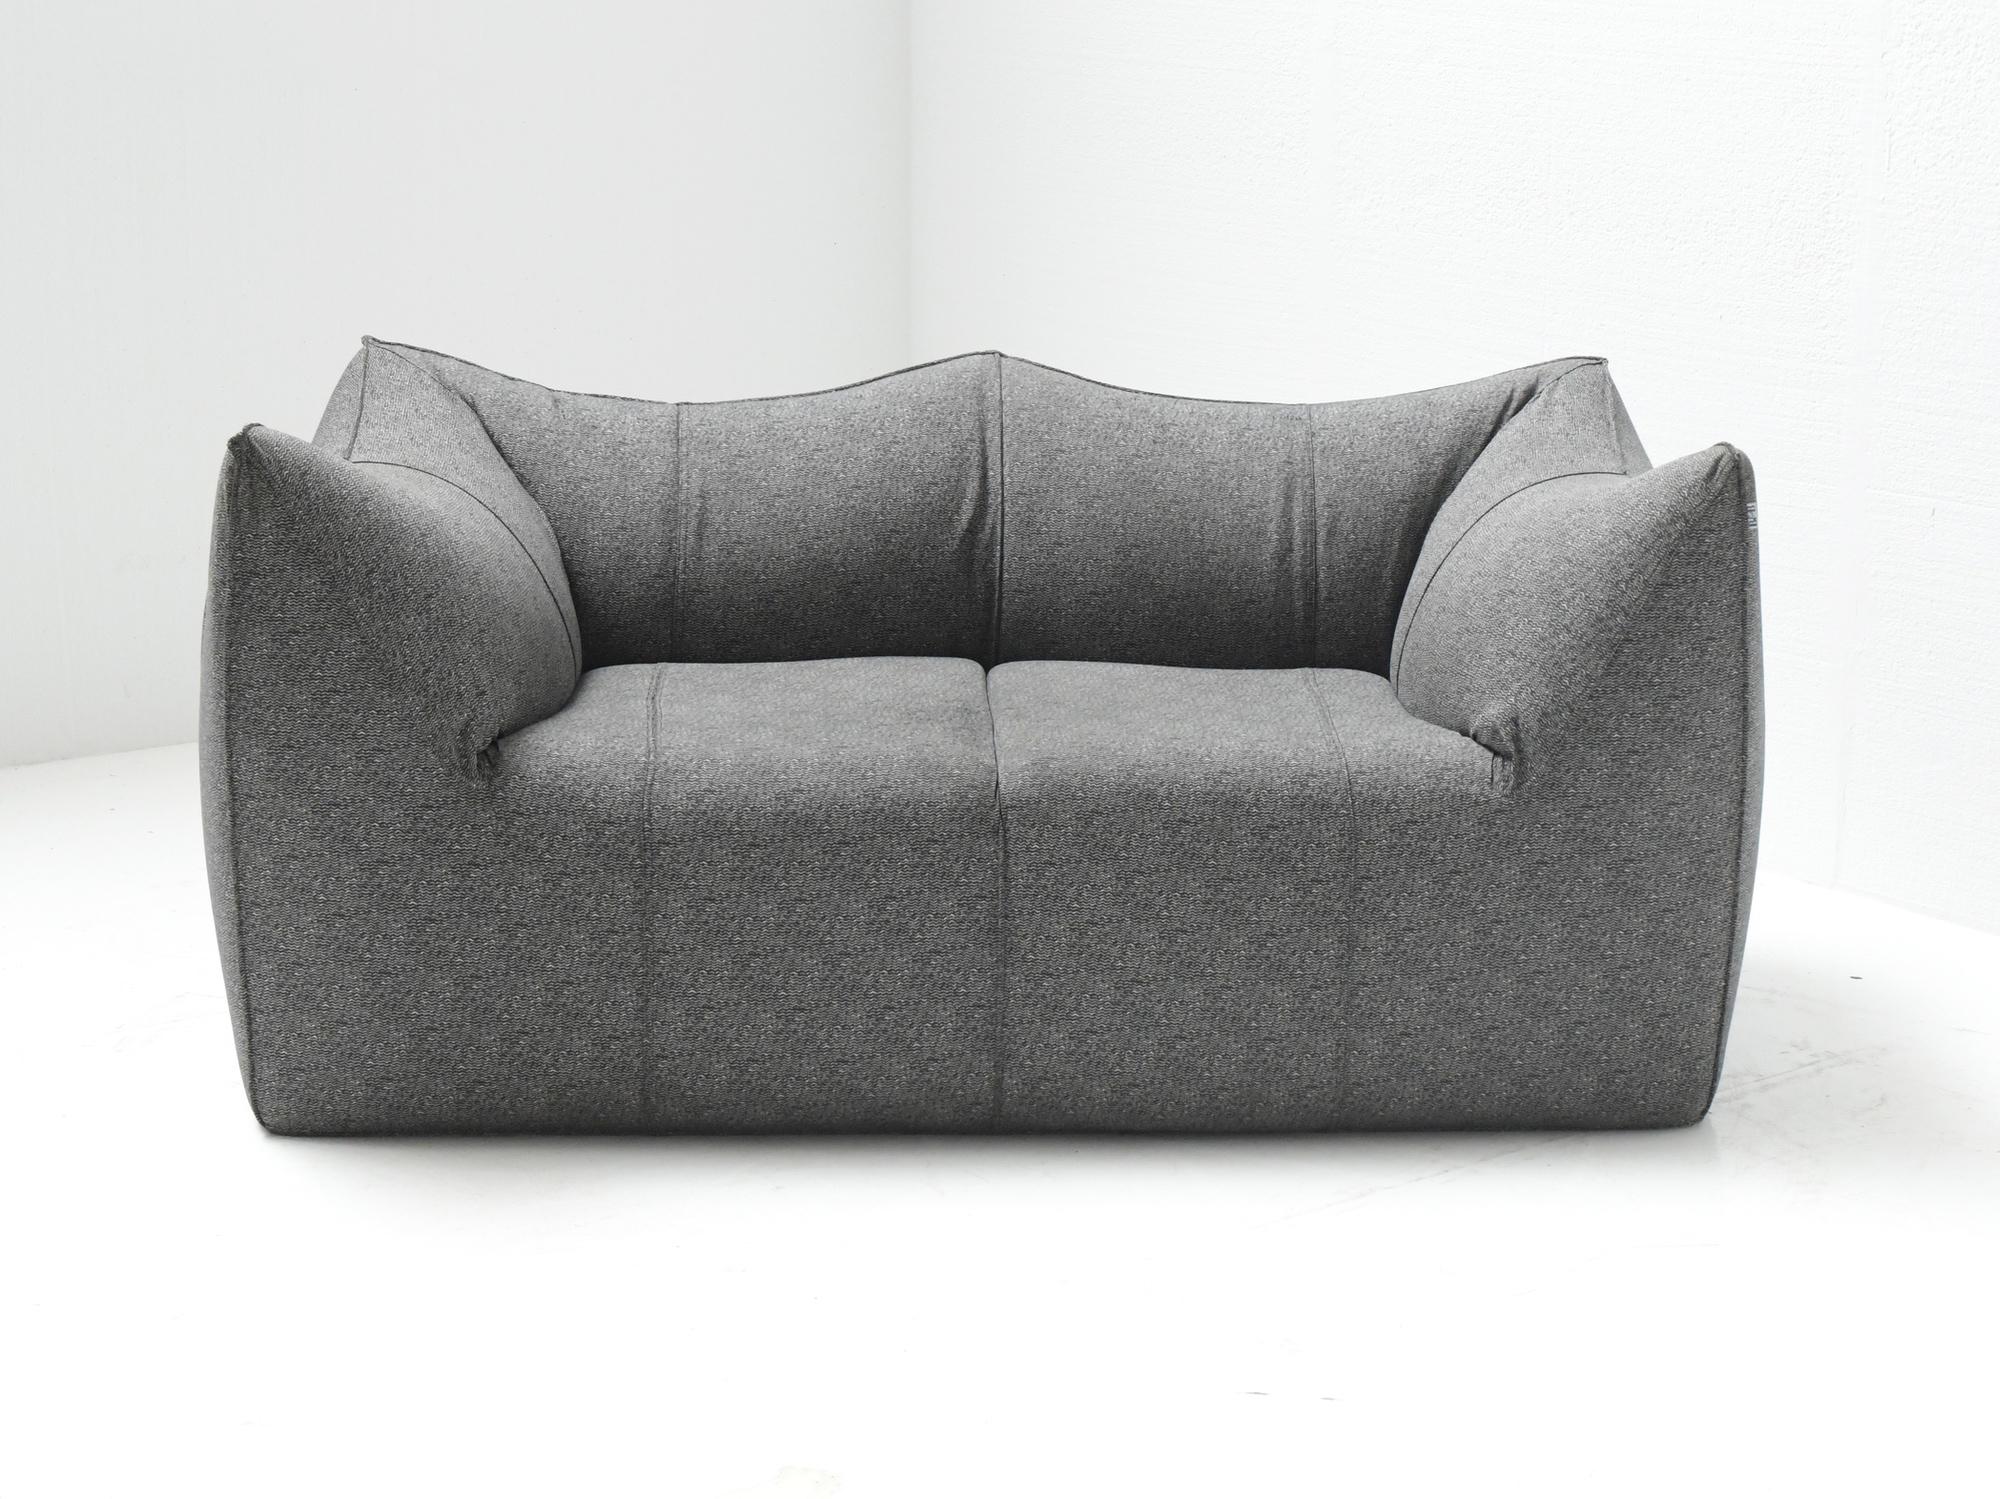 Great, stylish ‘Le Bambole’ sofa in its original grey fabric.
Designed by Mario Bellini for B&B Italia 1970s.

Mint condition - professionally cleaned - with label.

Dimensions :
W178 x D98 x H72 cm.